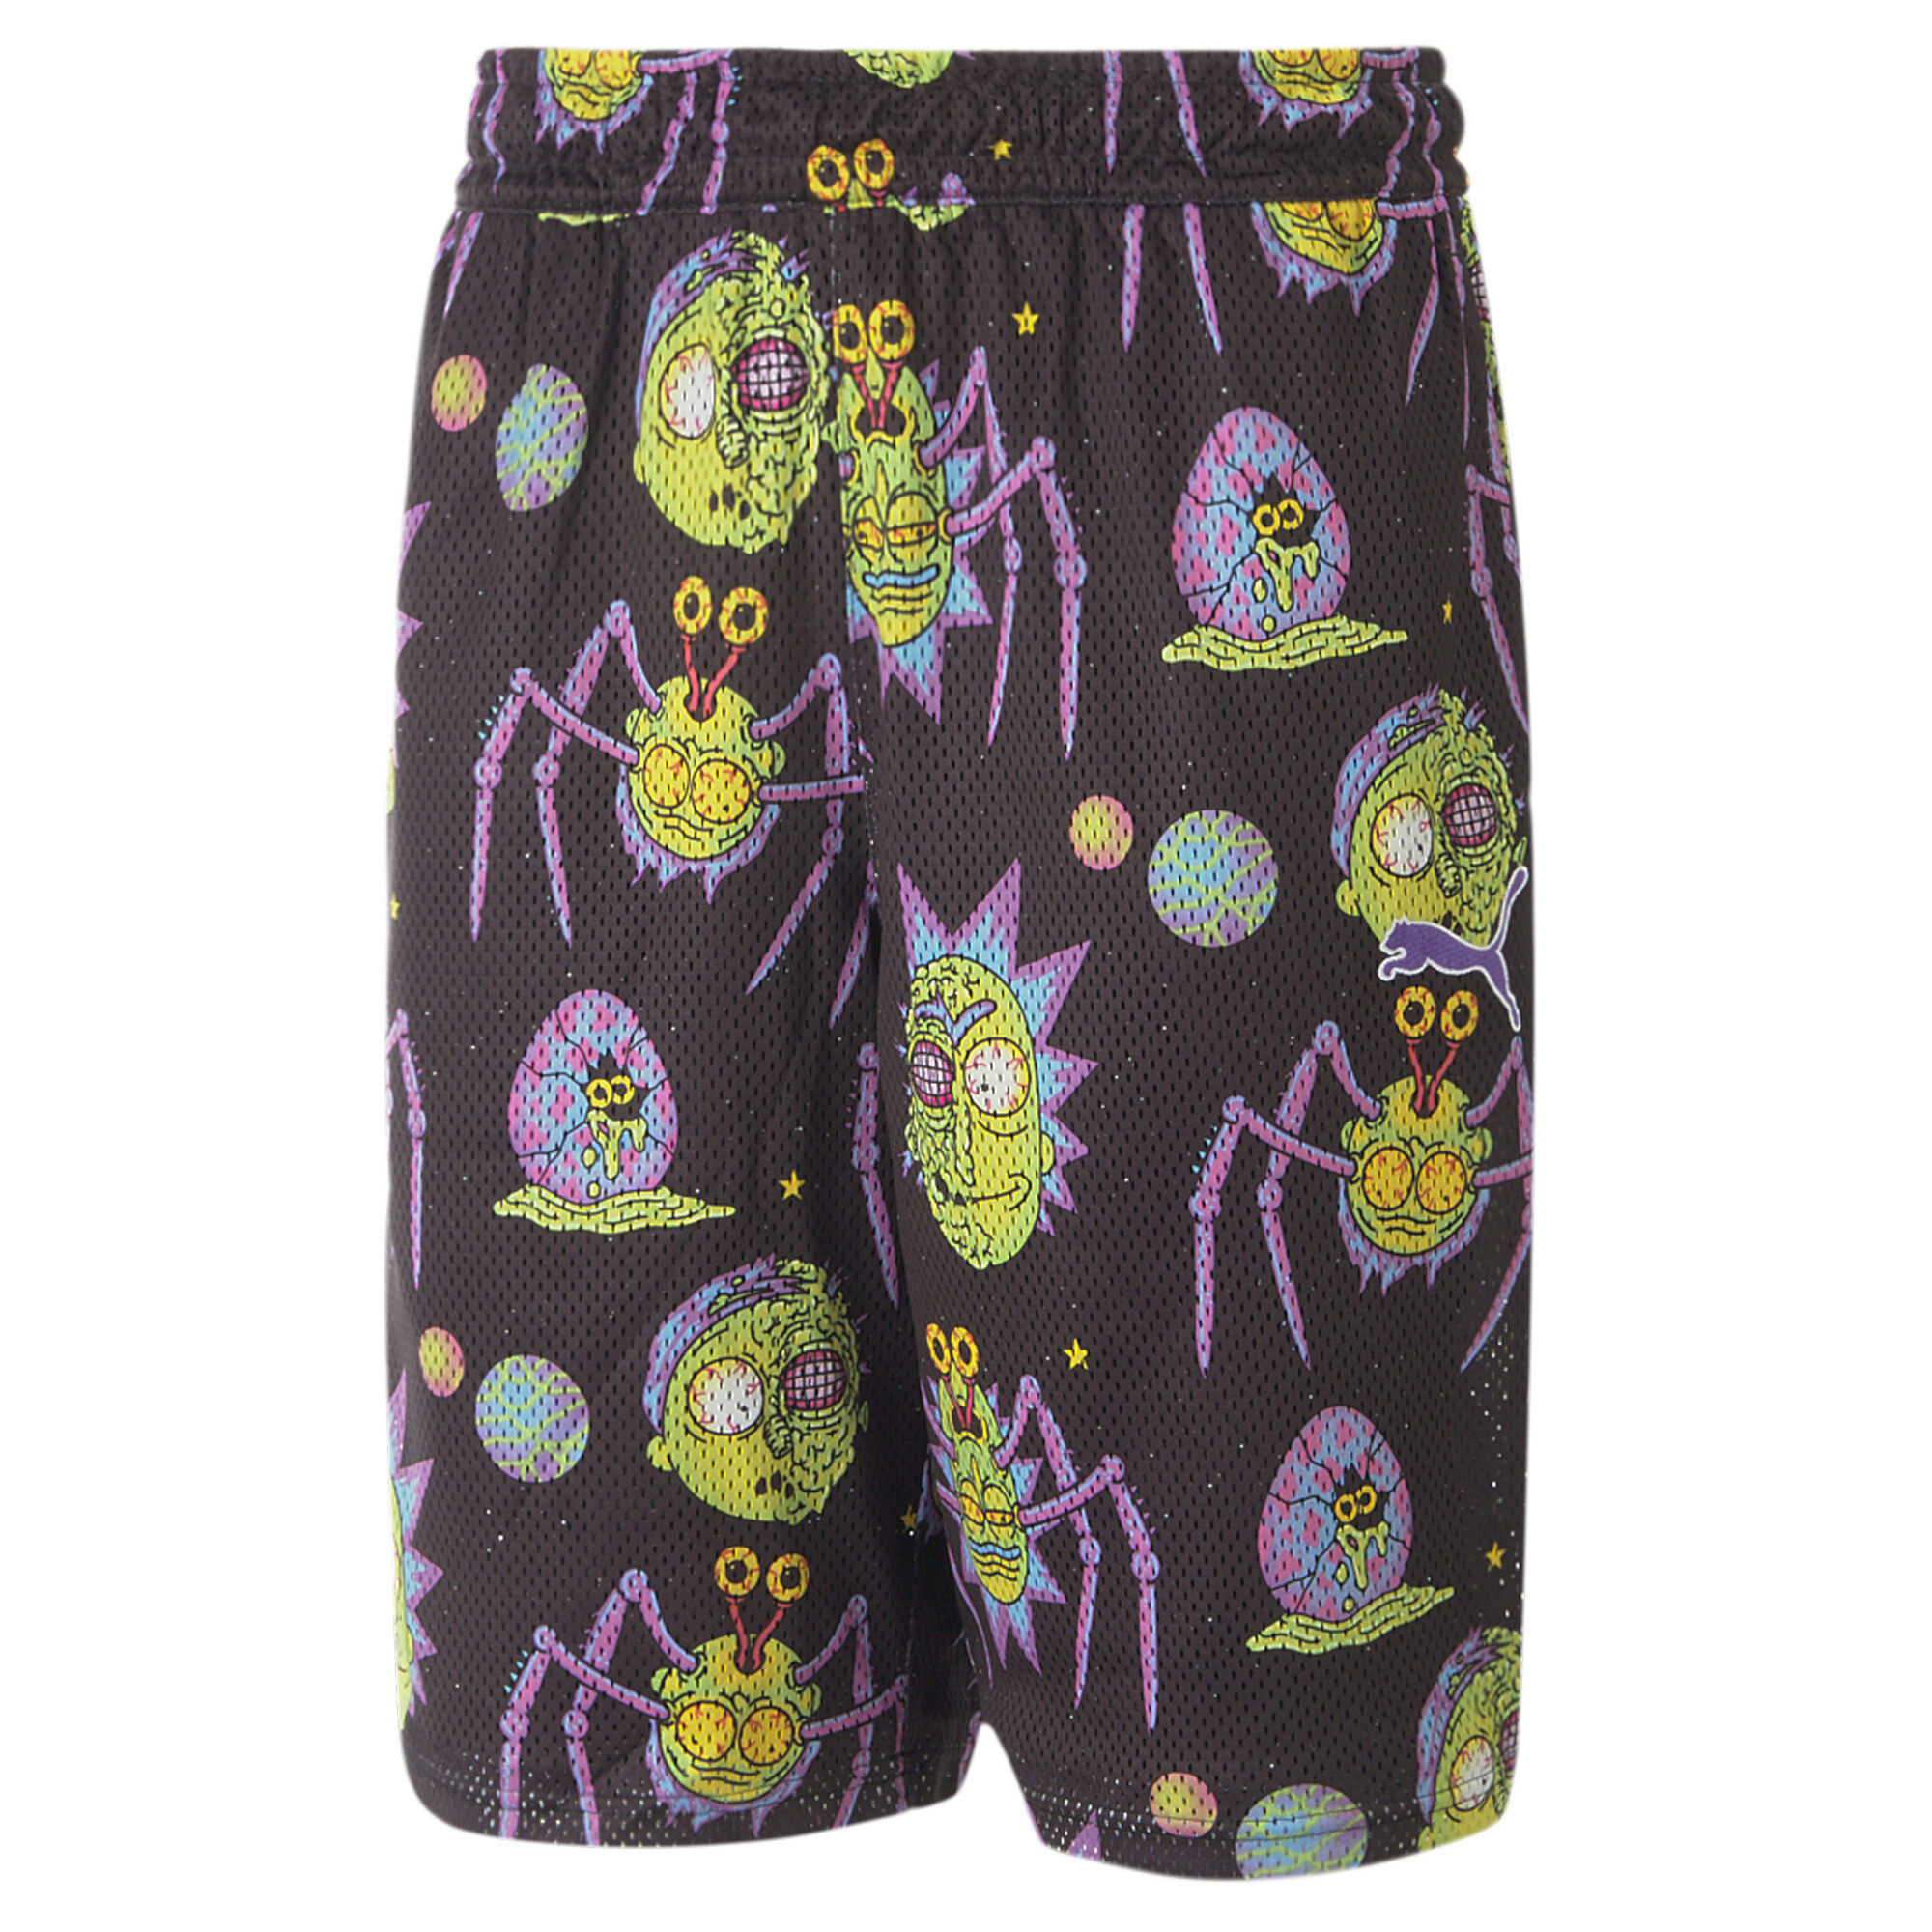 Men's PUMA X RICK AND MORTY Printed Basketball Shorts Men In 10 - Black, Size XS